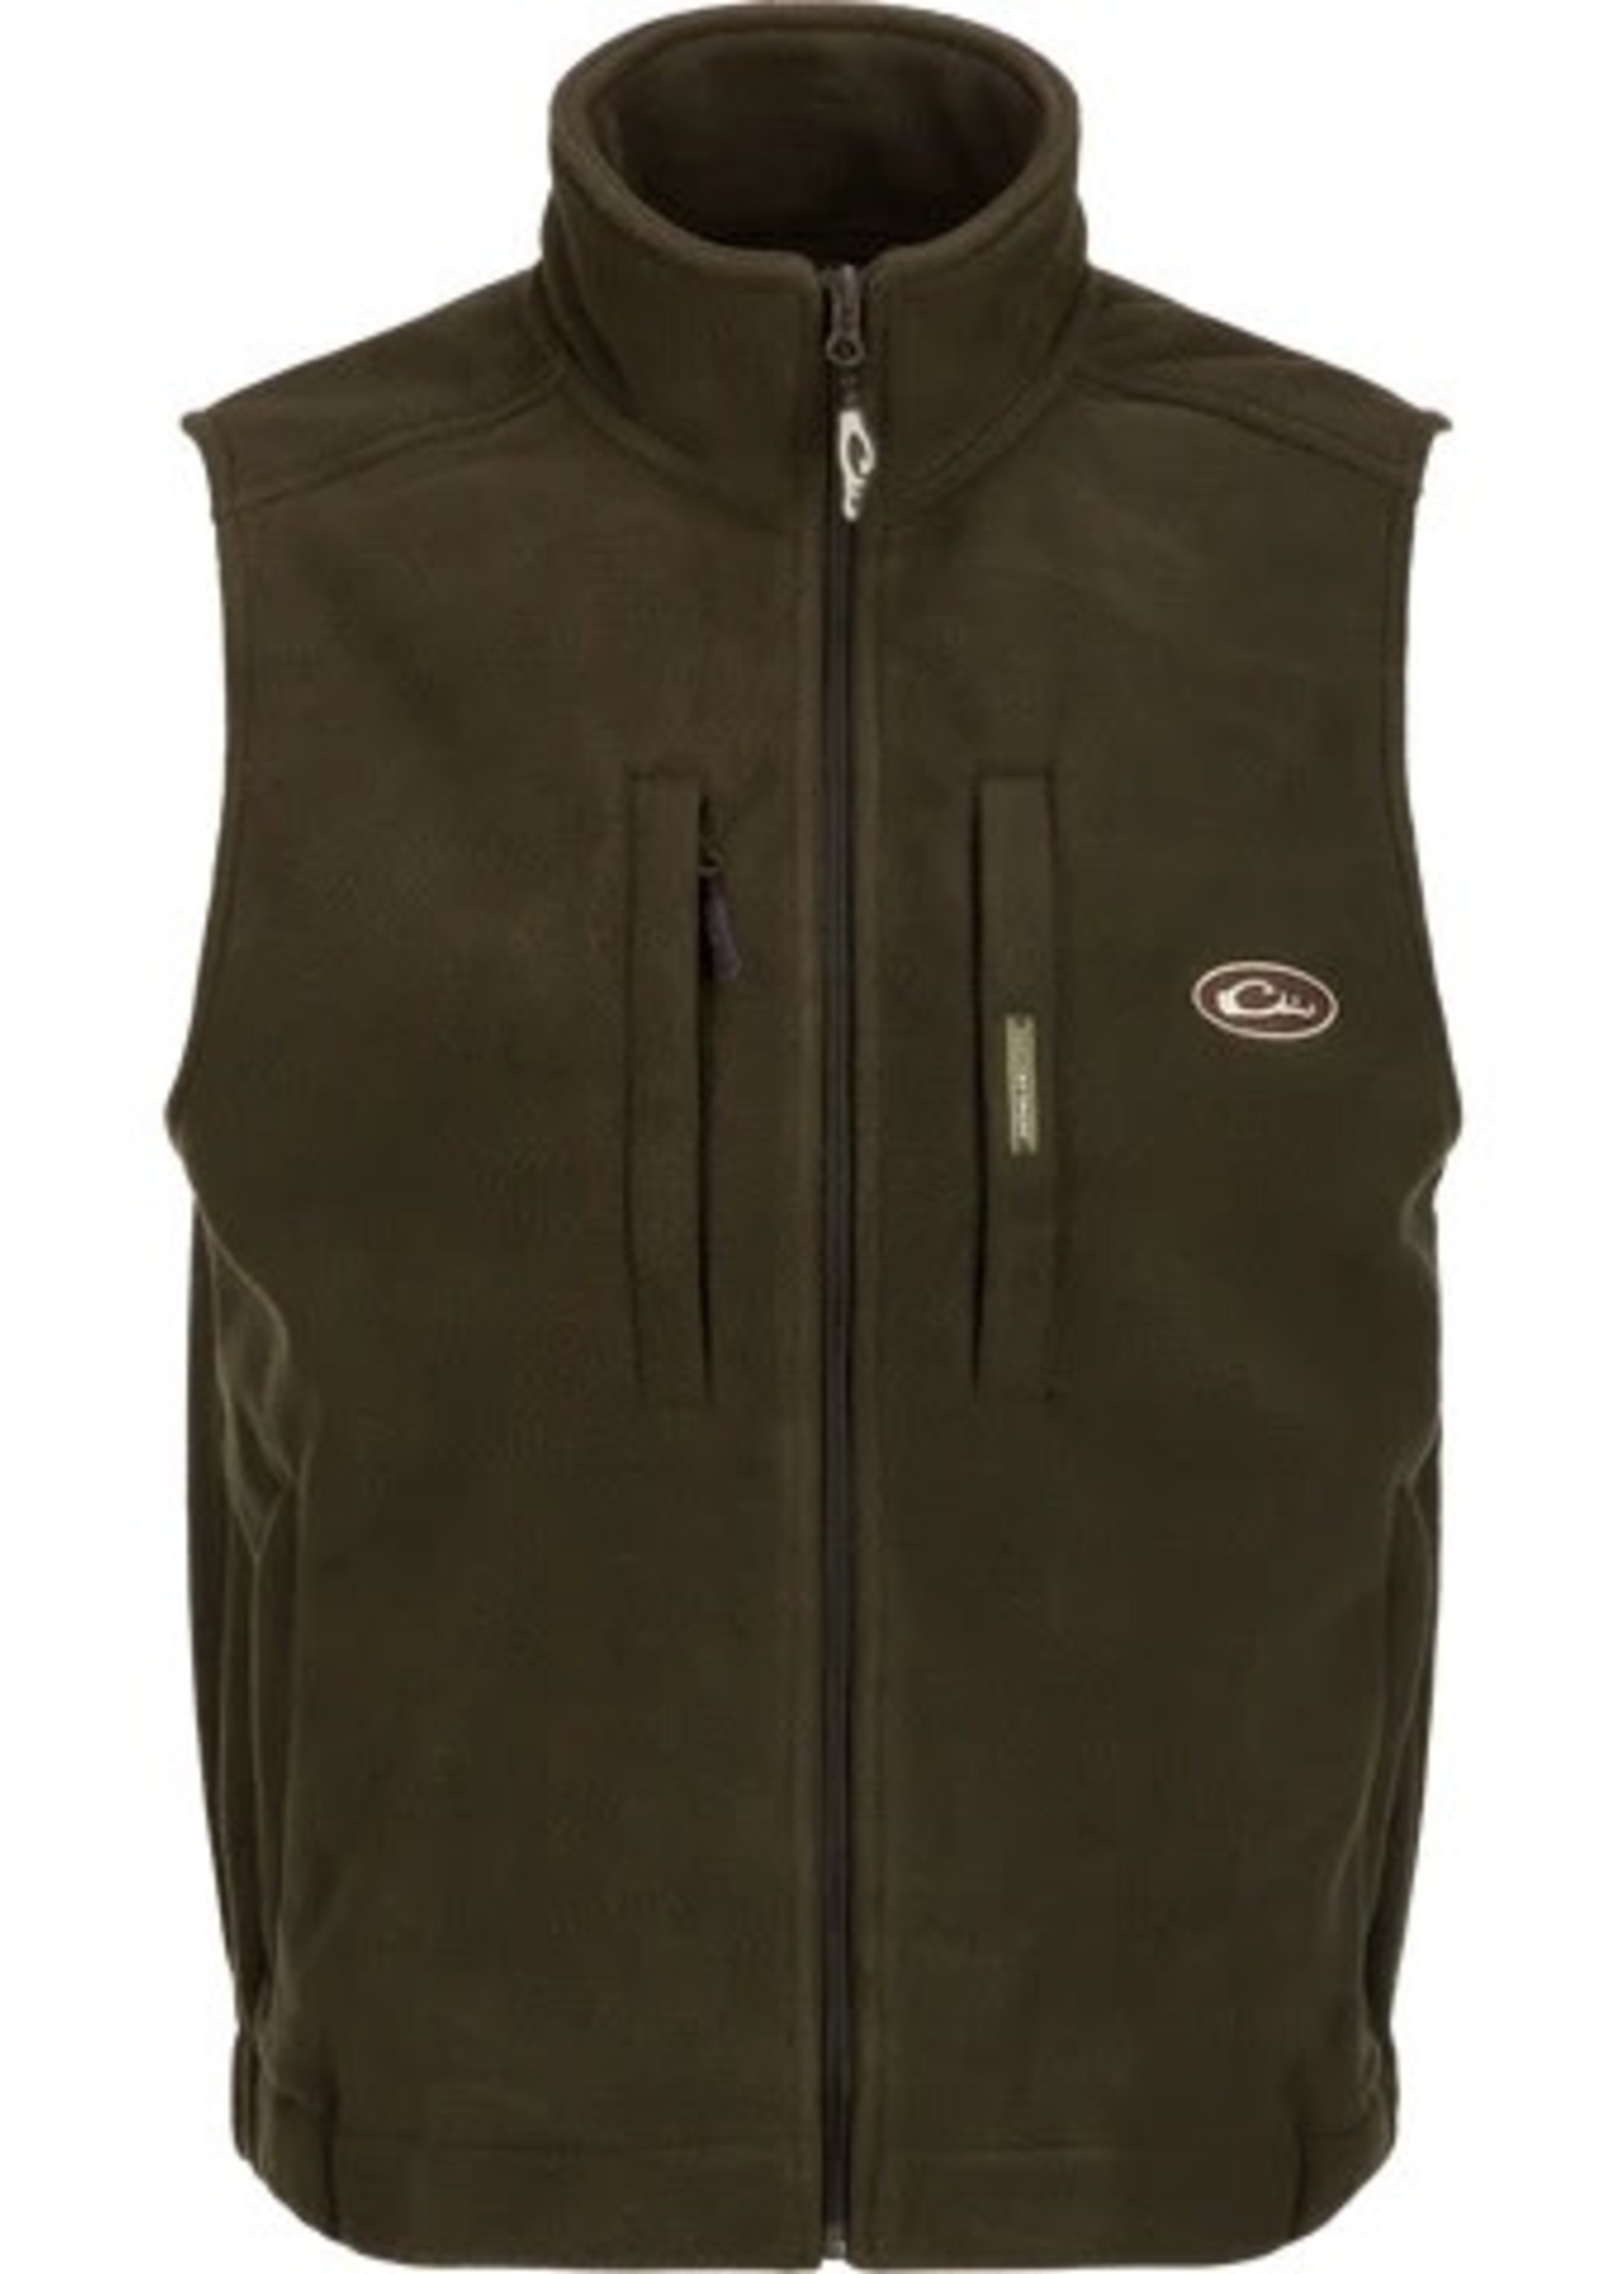 MST Solid Windproof Layering Vest